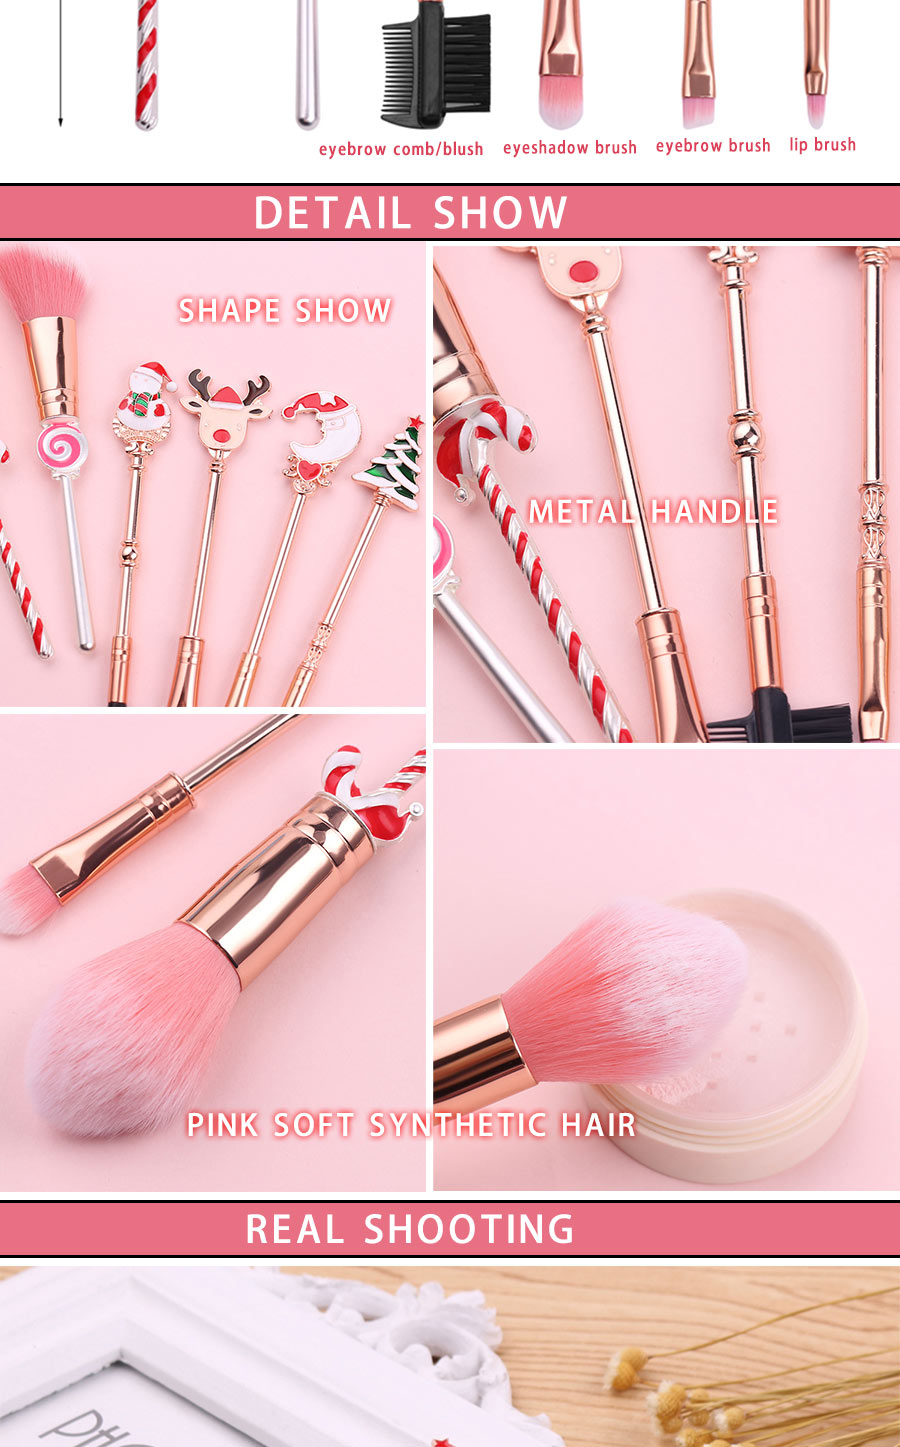 Luxurious Christmas Makeup Brushes Set Soft Synthetic Hair Cosmetic Eyeliner Foundation Powder Blending Eye Shadow Makeup Tools